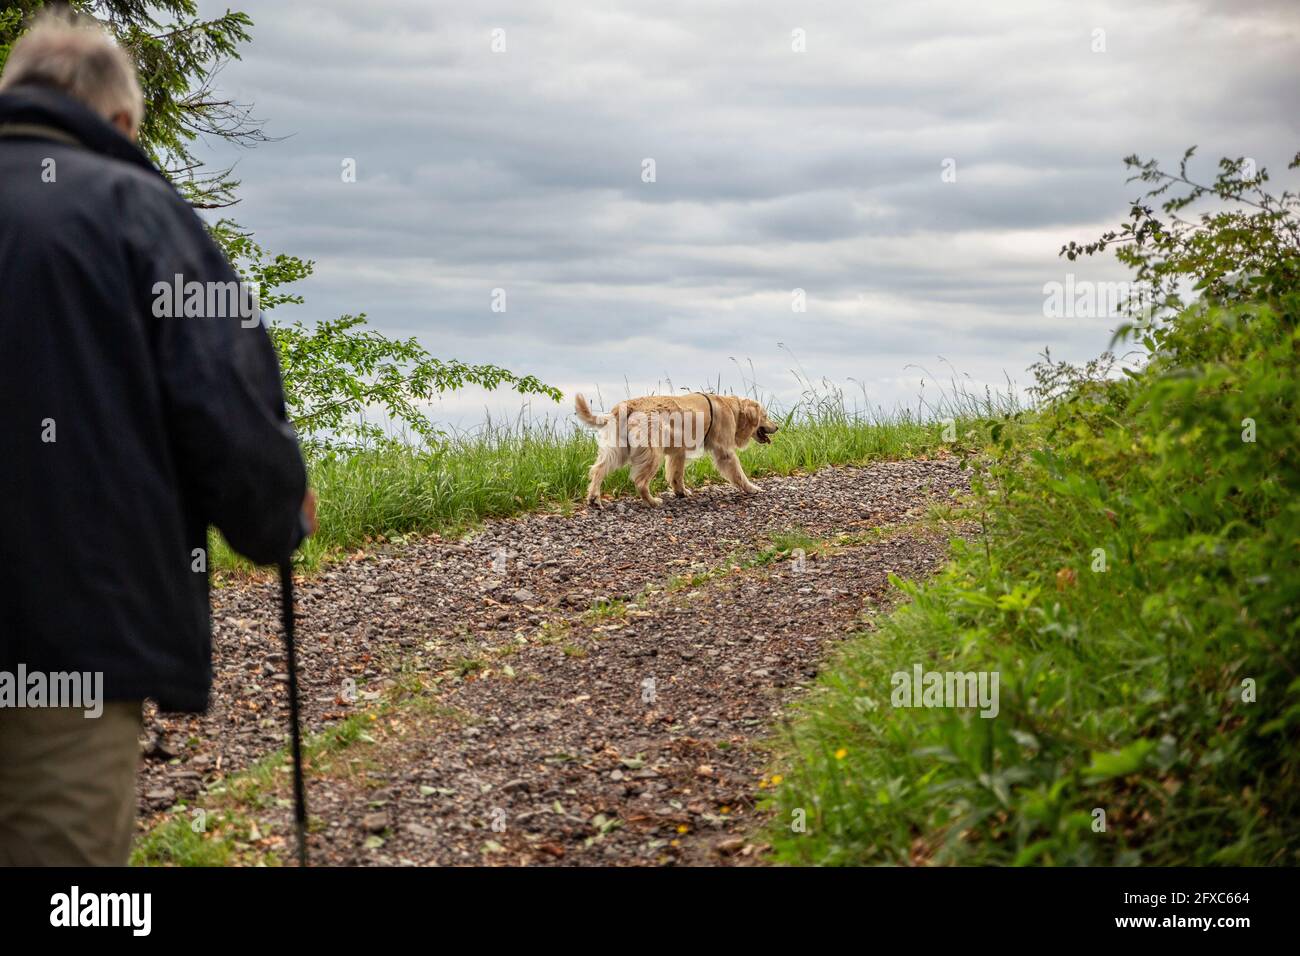 Man holding cane while walking on dirt road with Golden retriever dog in Province of Brescia, Lombardy, Italy Stock Photo